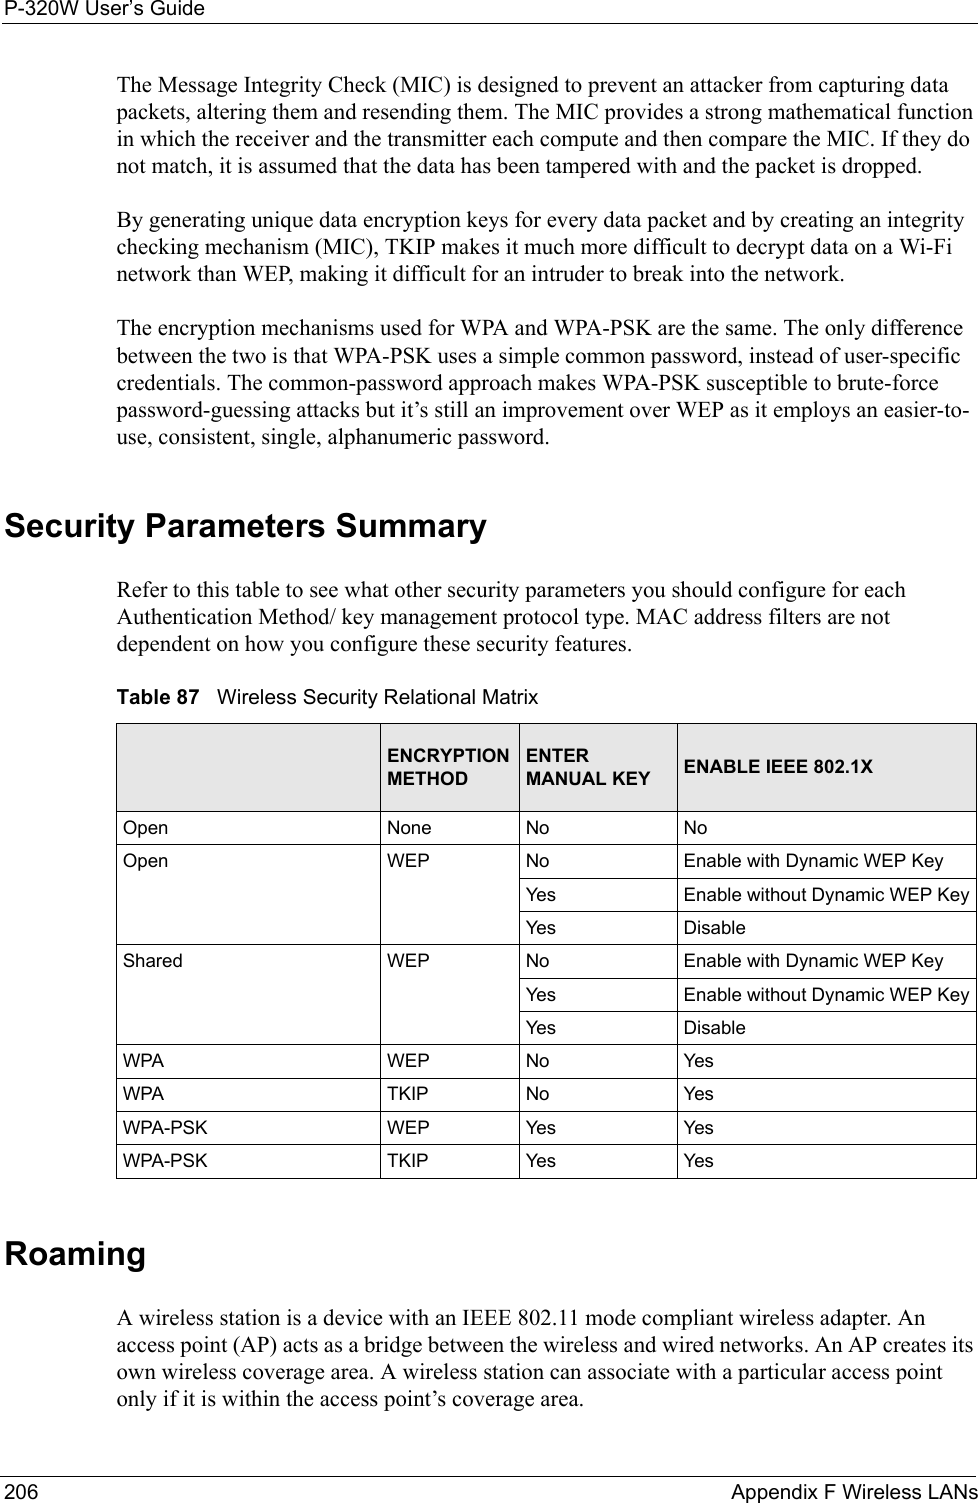 P-320W User’s Guide206  Appendix F Wireless LANsThe Message Integrity Check (MIC) is designed to prevent an attacker from capturing data packets, altering them and resending them. The MIC provides a strong mathematical function in which the receiver and the transmitter each compute and then compare the MIC. If they do not match, it is assumed that the data has been tampered with and the packet is dropped. By generating unique data encryption keys for every data packet and by creating an integrity checking mechanism (MIC), TKIP makes it much more difficult to decrypt data on a Wi-Fi network than WEP, making it difficult for an intruder to break into the network. The encryption mechanisms used for WPA and WPA-PSK are the same. The only difference between the two is that WPA-PSK uses a simple common password, instead of user-specific credentials. The common-password approach makes WPA-PSK susceptible to brute-force password-guessing attacks but it’s still an improvement over WEP as it employs an easier-to-use, consistent, single, alphanumeric password.Security Parameters SummaryRefer to this table to see what other security parameters you should configure for each Authentication Method/ key management protocol type. MAC address filters are not dependent on how you configure these security features.Table 87   Wireless Security Relational Matrix AUTHENTICATION METHOD/ KEY MANAGEMENT PROTOCOLENCRYPTION METHODENTER MANUAL KEY ENABLE IEEE 802.1X Open  None No  NoOpen WEP No Enable with Dynamic WEP Key Yes Enable without Dynamic WEP KeyYes Disable Shared WEP  No Enable with Dynamic WEP KeyYes Enable without Dynamic WEP KeyYes Disable WPA  WEP No YesWPA  TKIP No YesWPA-PSK  WEP Yes Yes WPA-PSK TKIP Yes YesRoamingA wireless station is a device with an IEEE 802.11 mode compliant wireless adapter. An access point (AP) acts as a bridge between the wireless and wired networks. An AP creates its own wireless coverage area. A wireless station can associate with a particular access point only if it is within the access point’s coverage area.